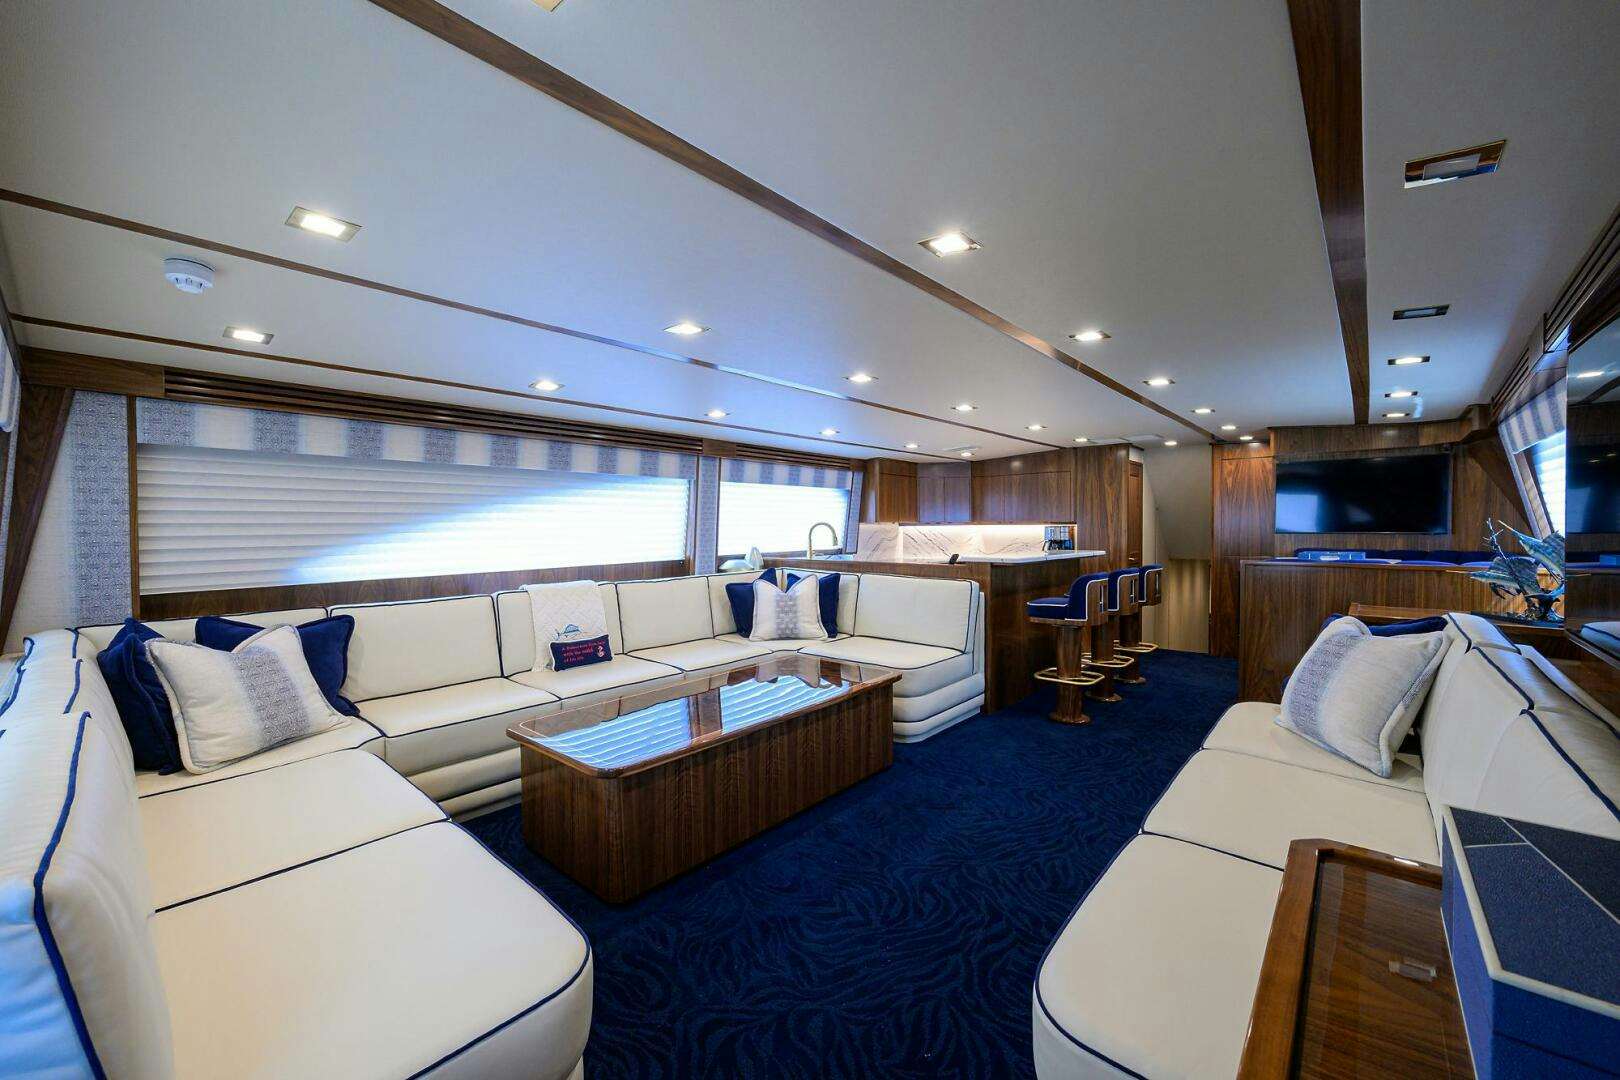 Kemosabe
Yacht for Sale